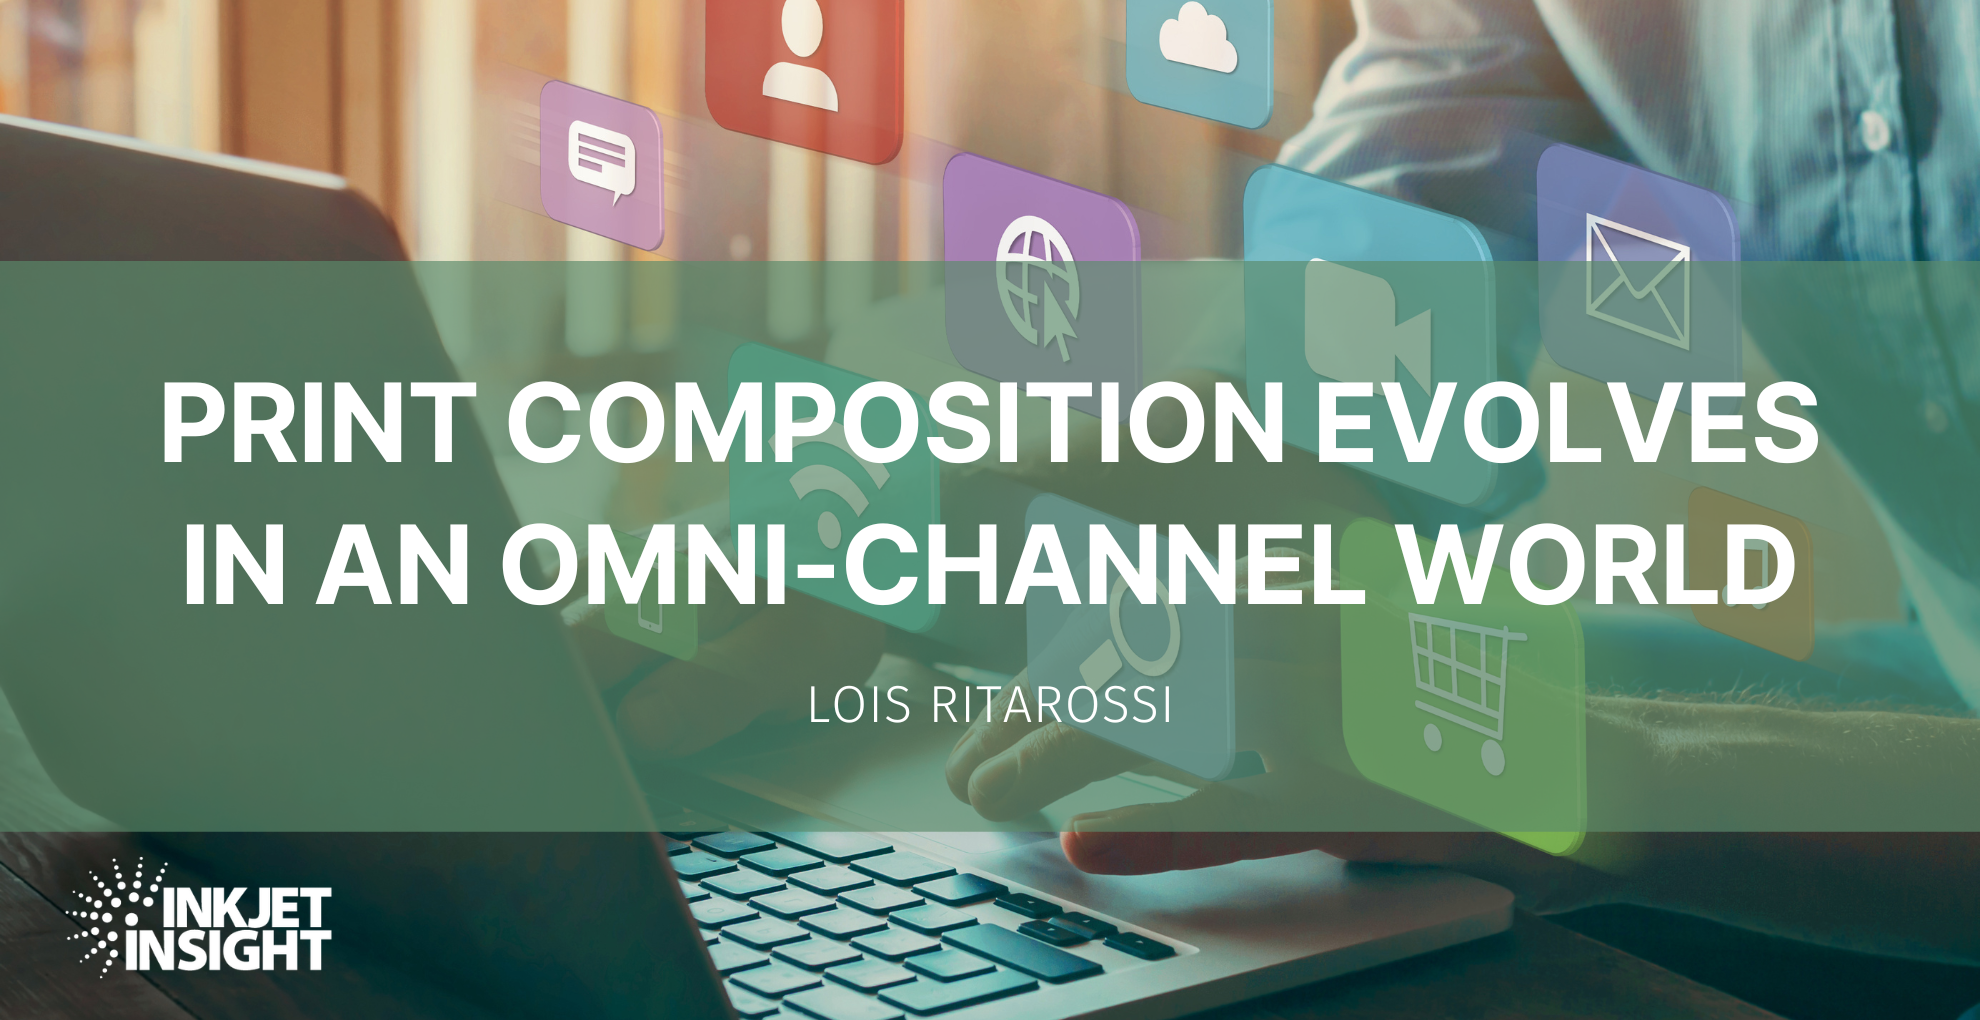 Featured image for “Print composition evolves in an omni-channel world”